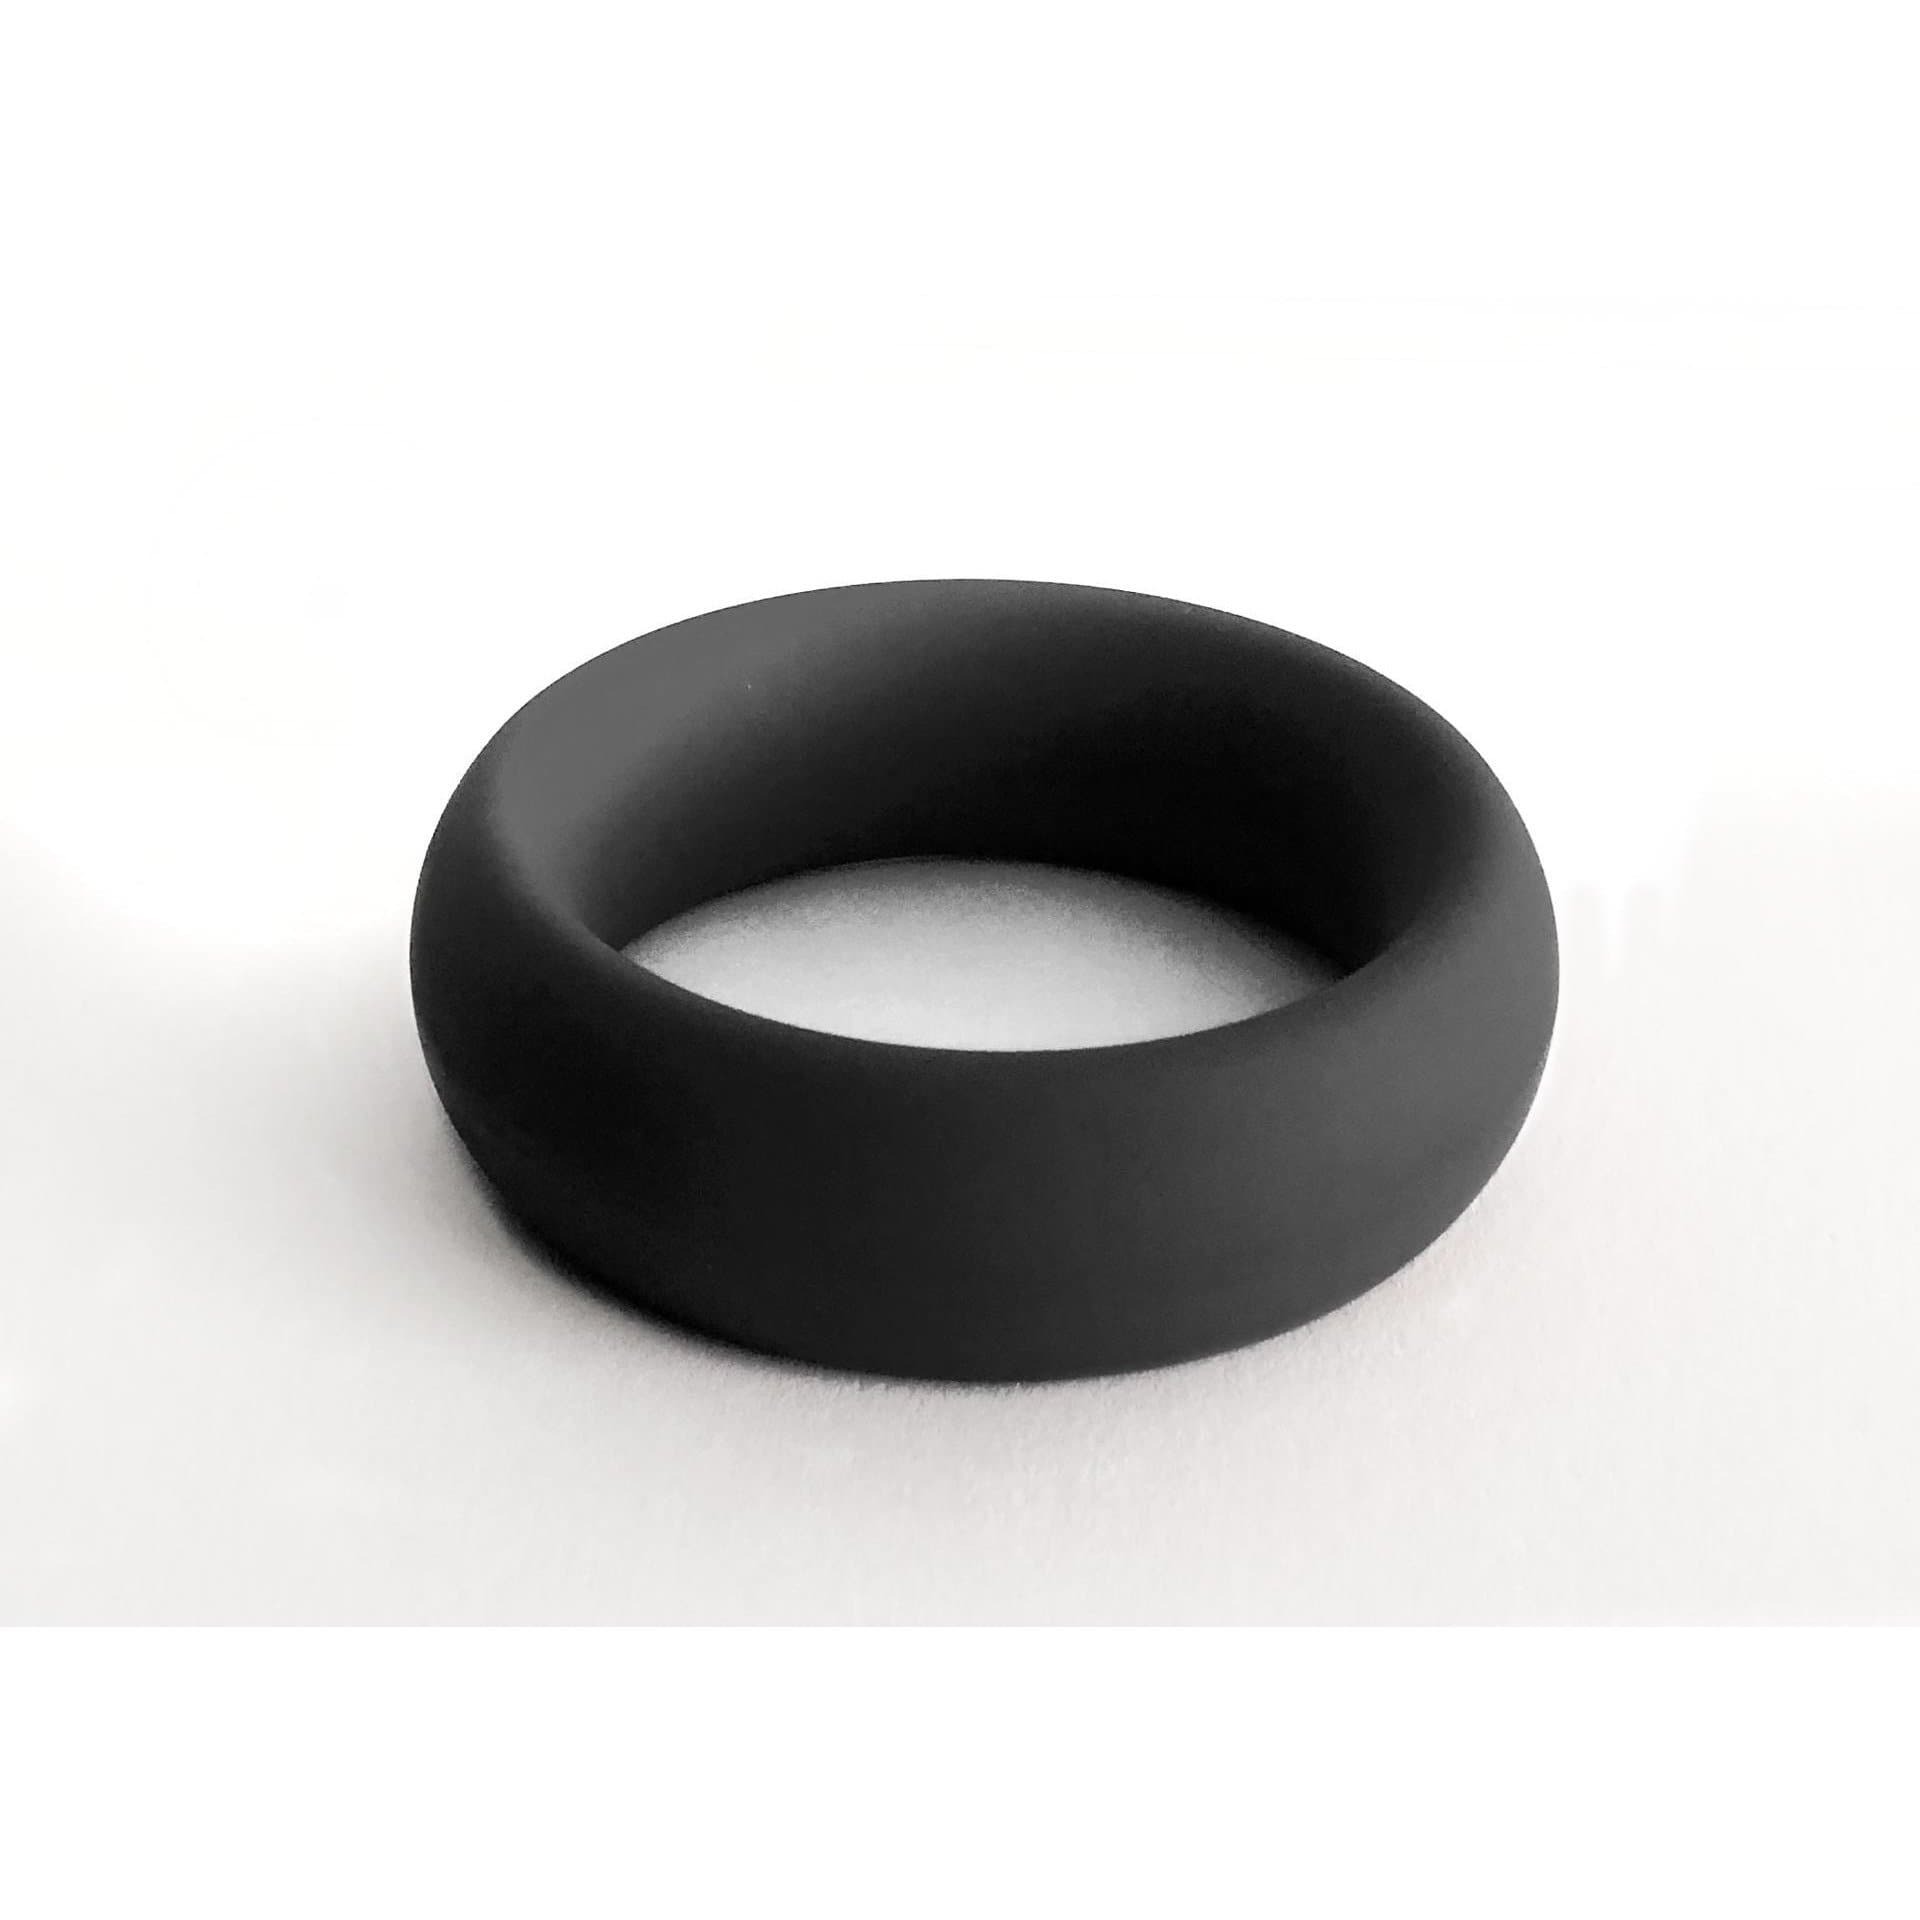 cock ring, adjustable cock ring